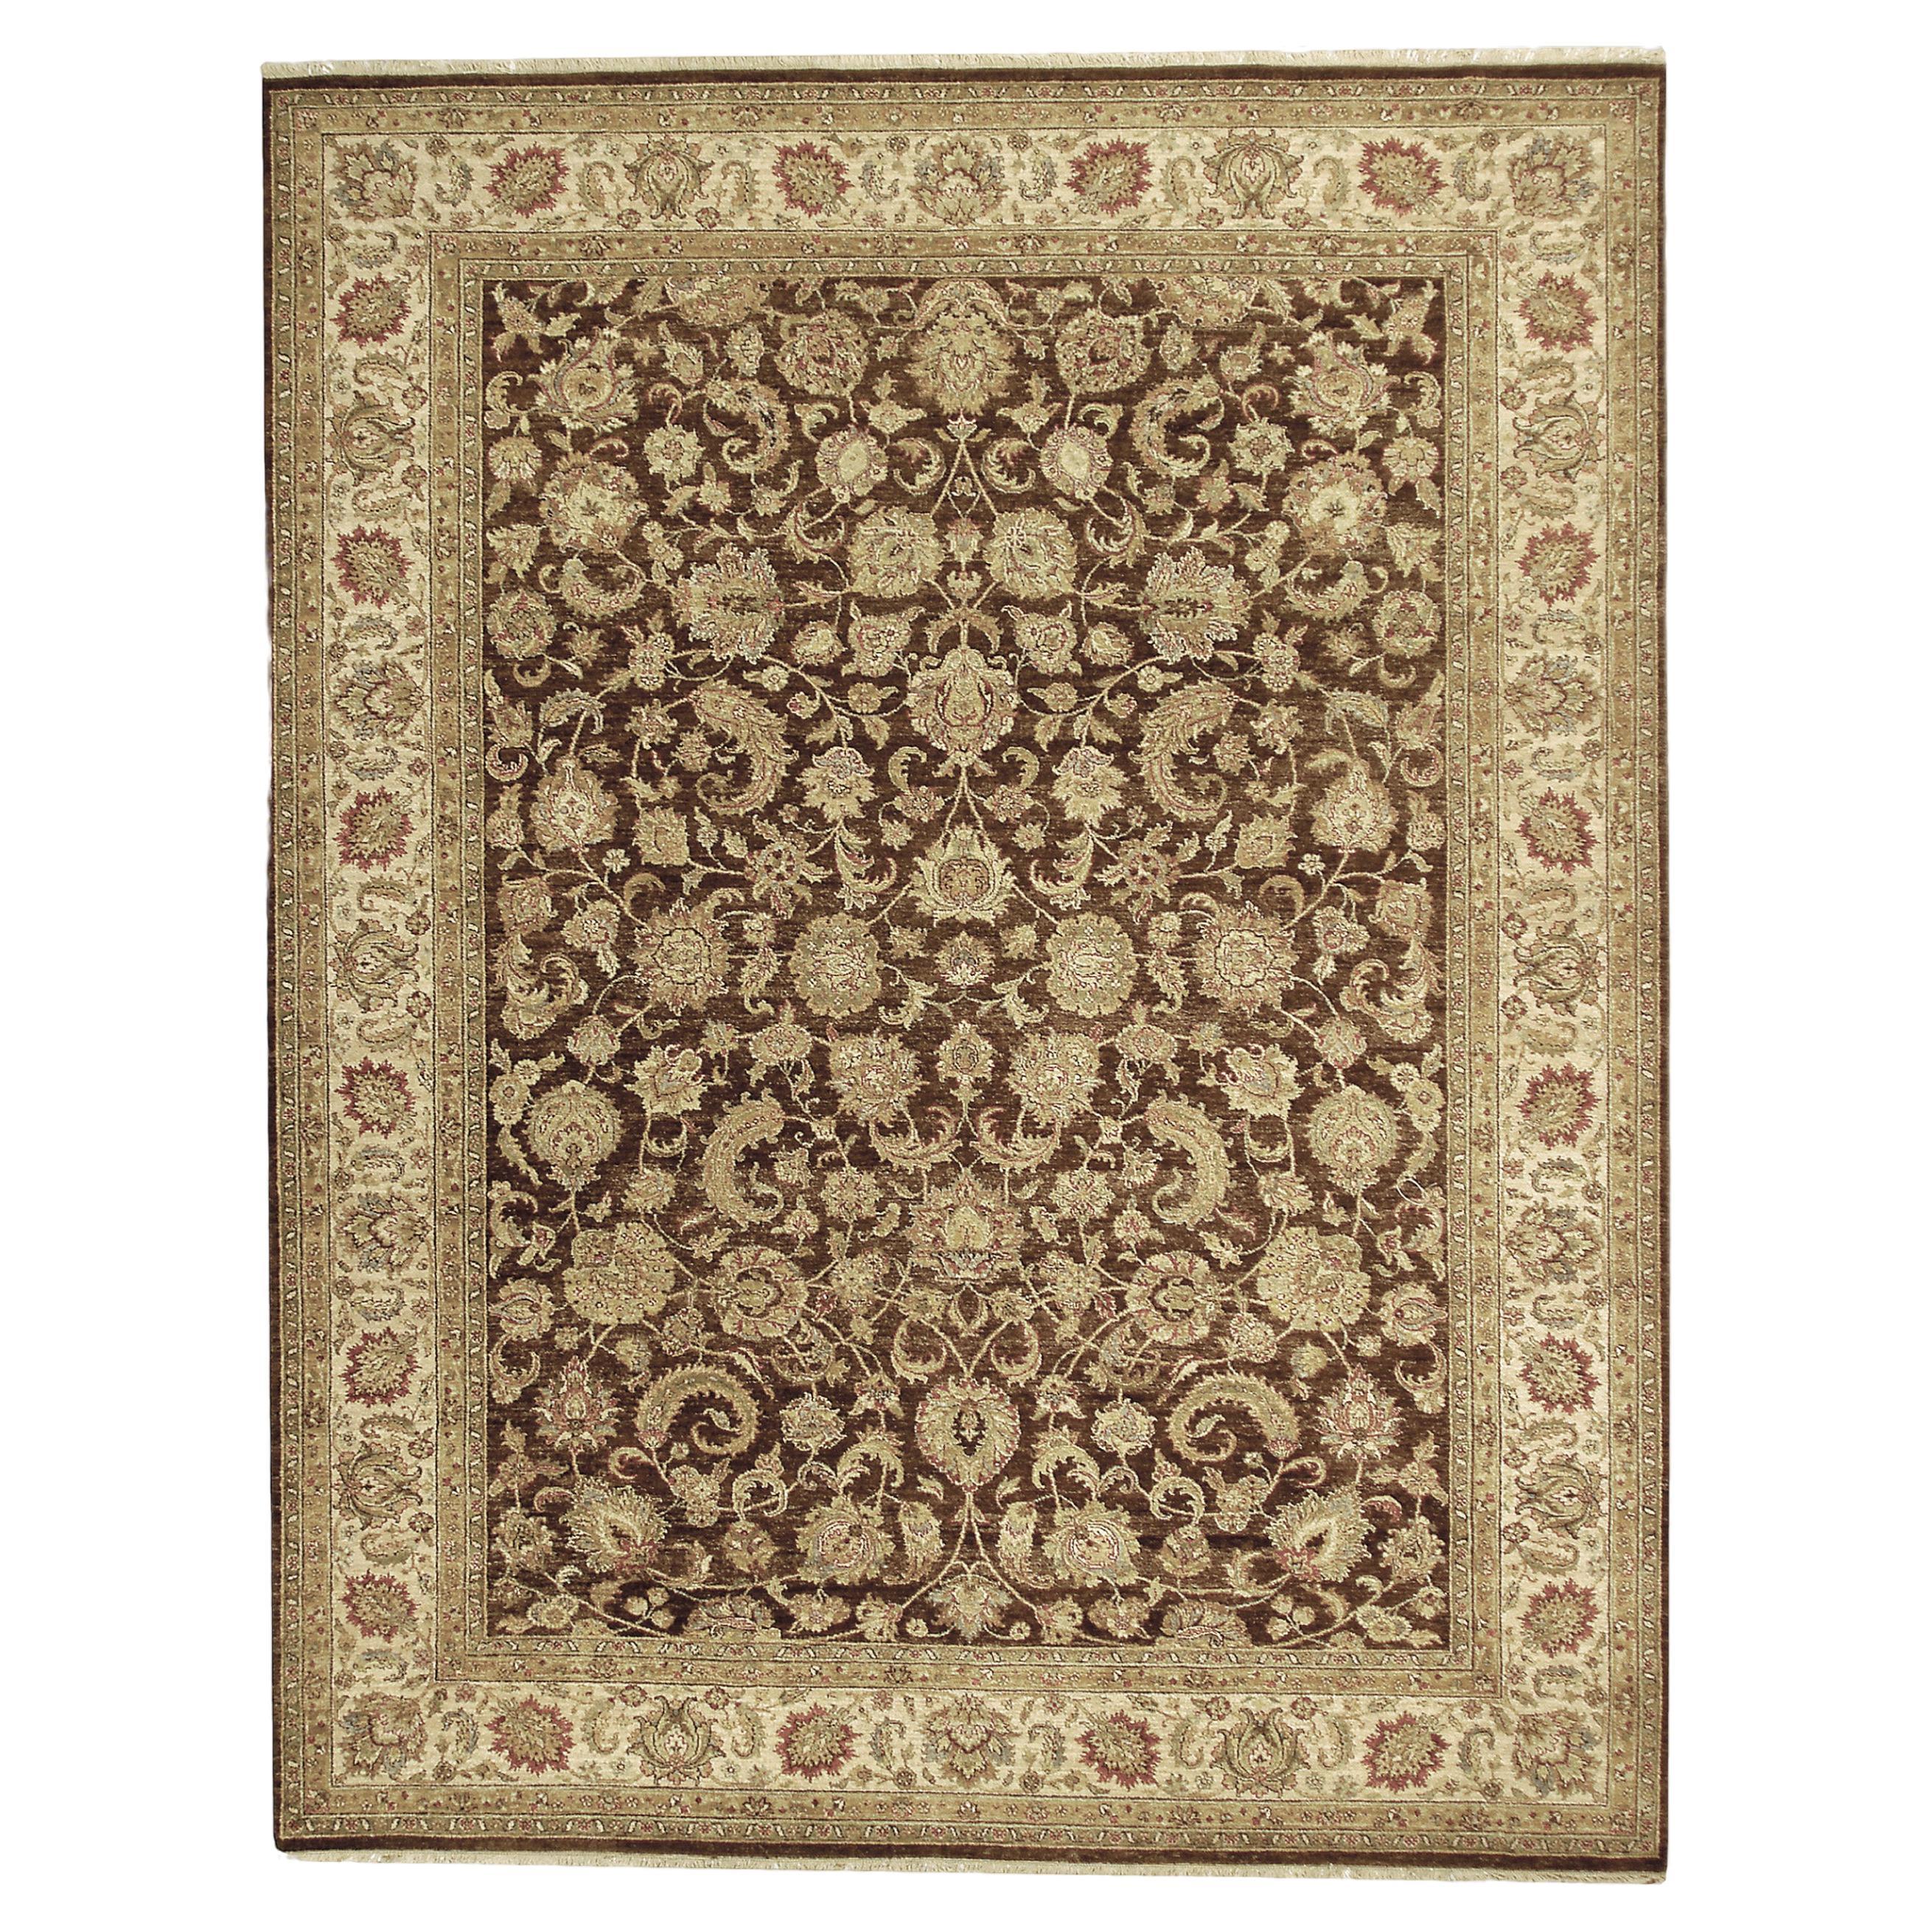 Luxury Traditional Hand-Knotted Brown/Cream 14x28 Rug